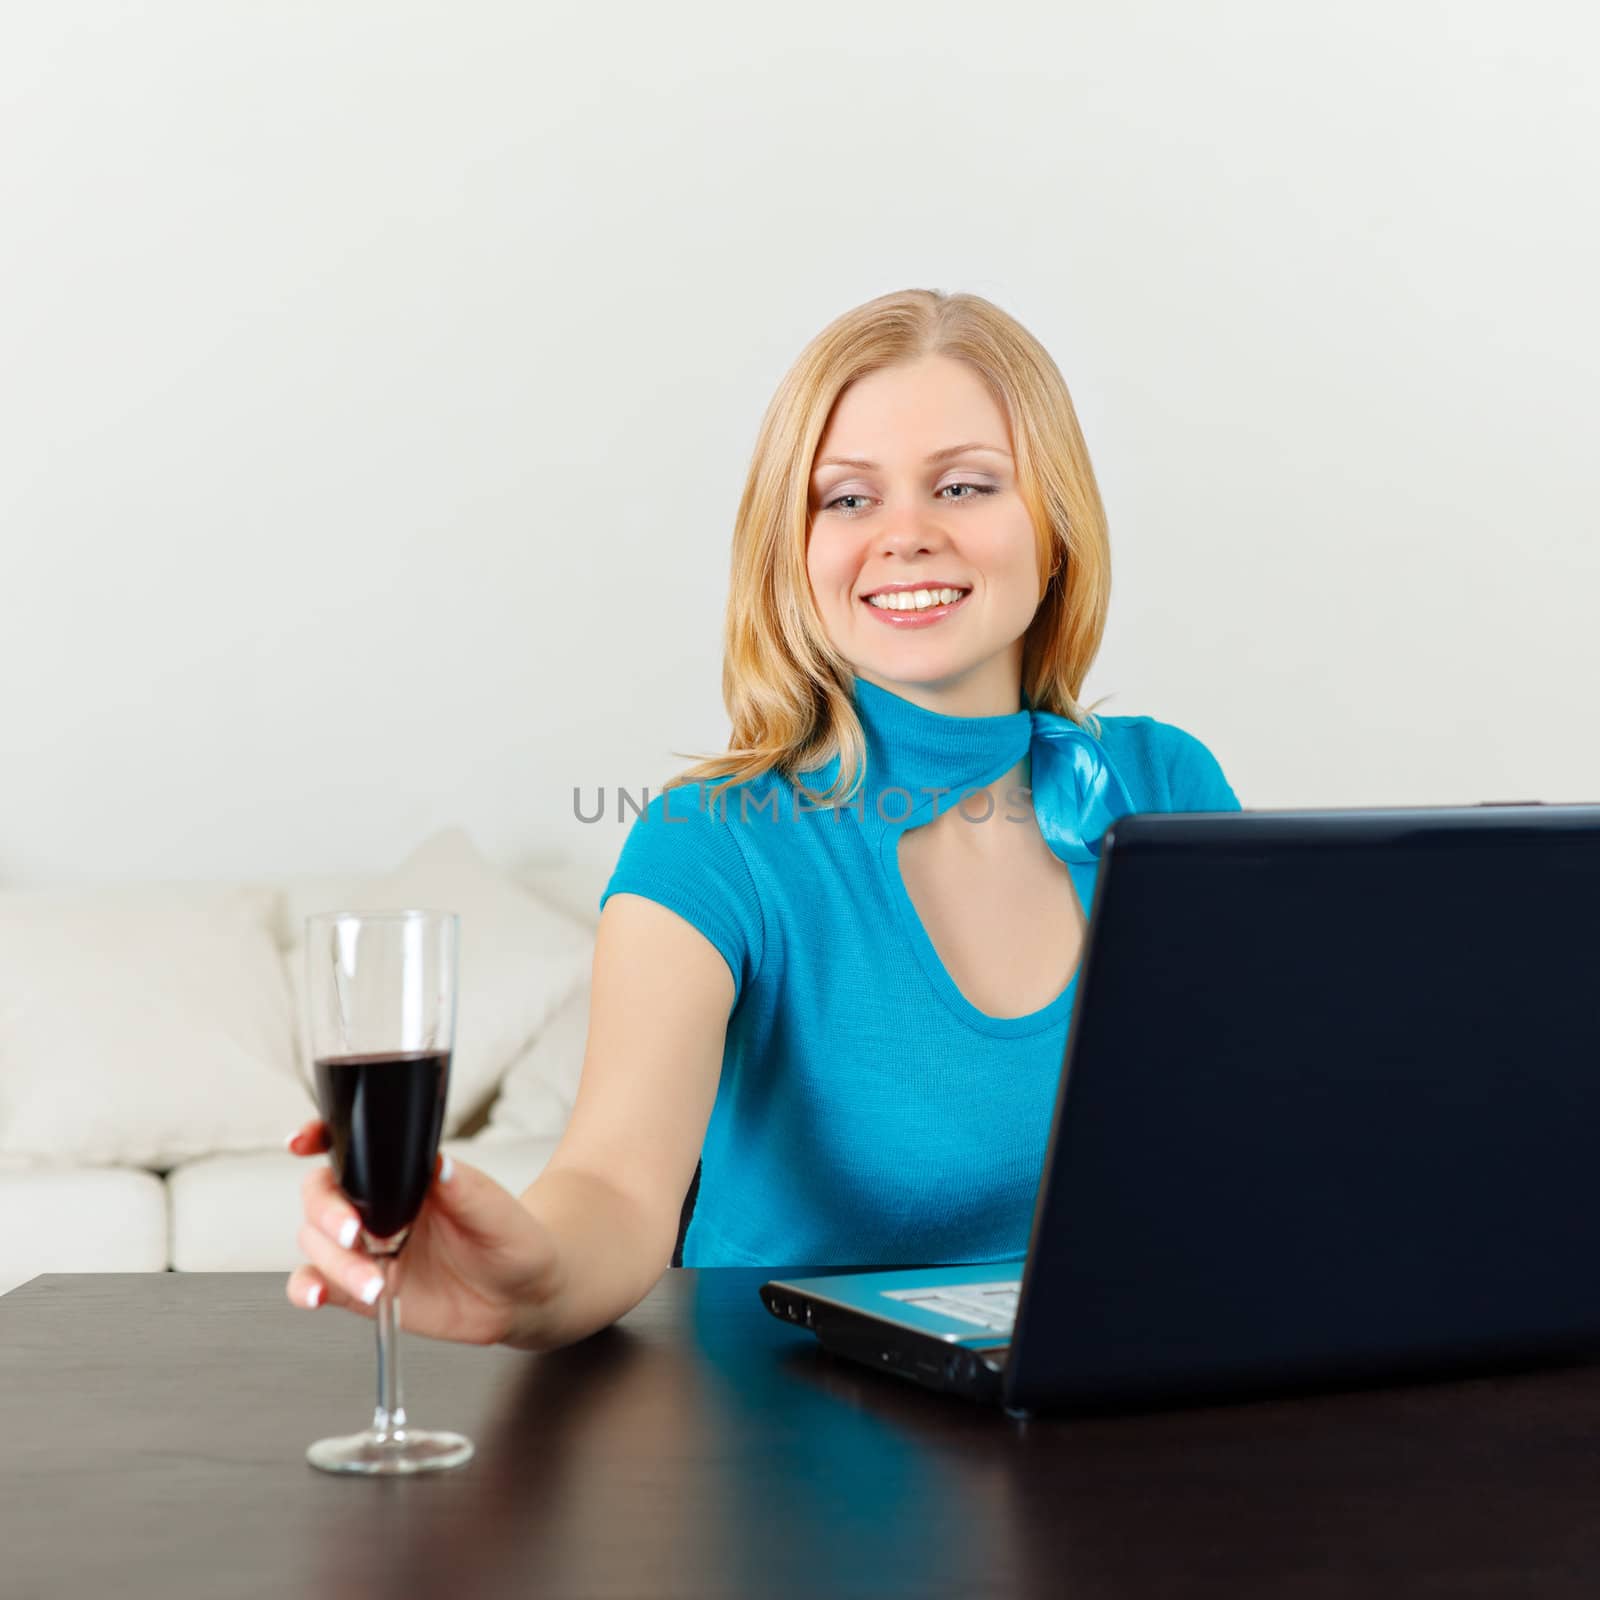 business woman celebrating with wine in front of her laptop